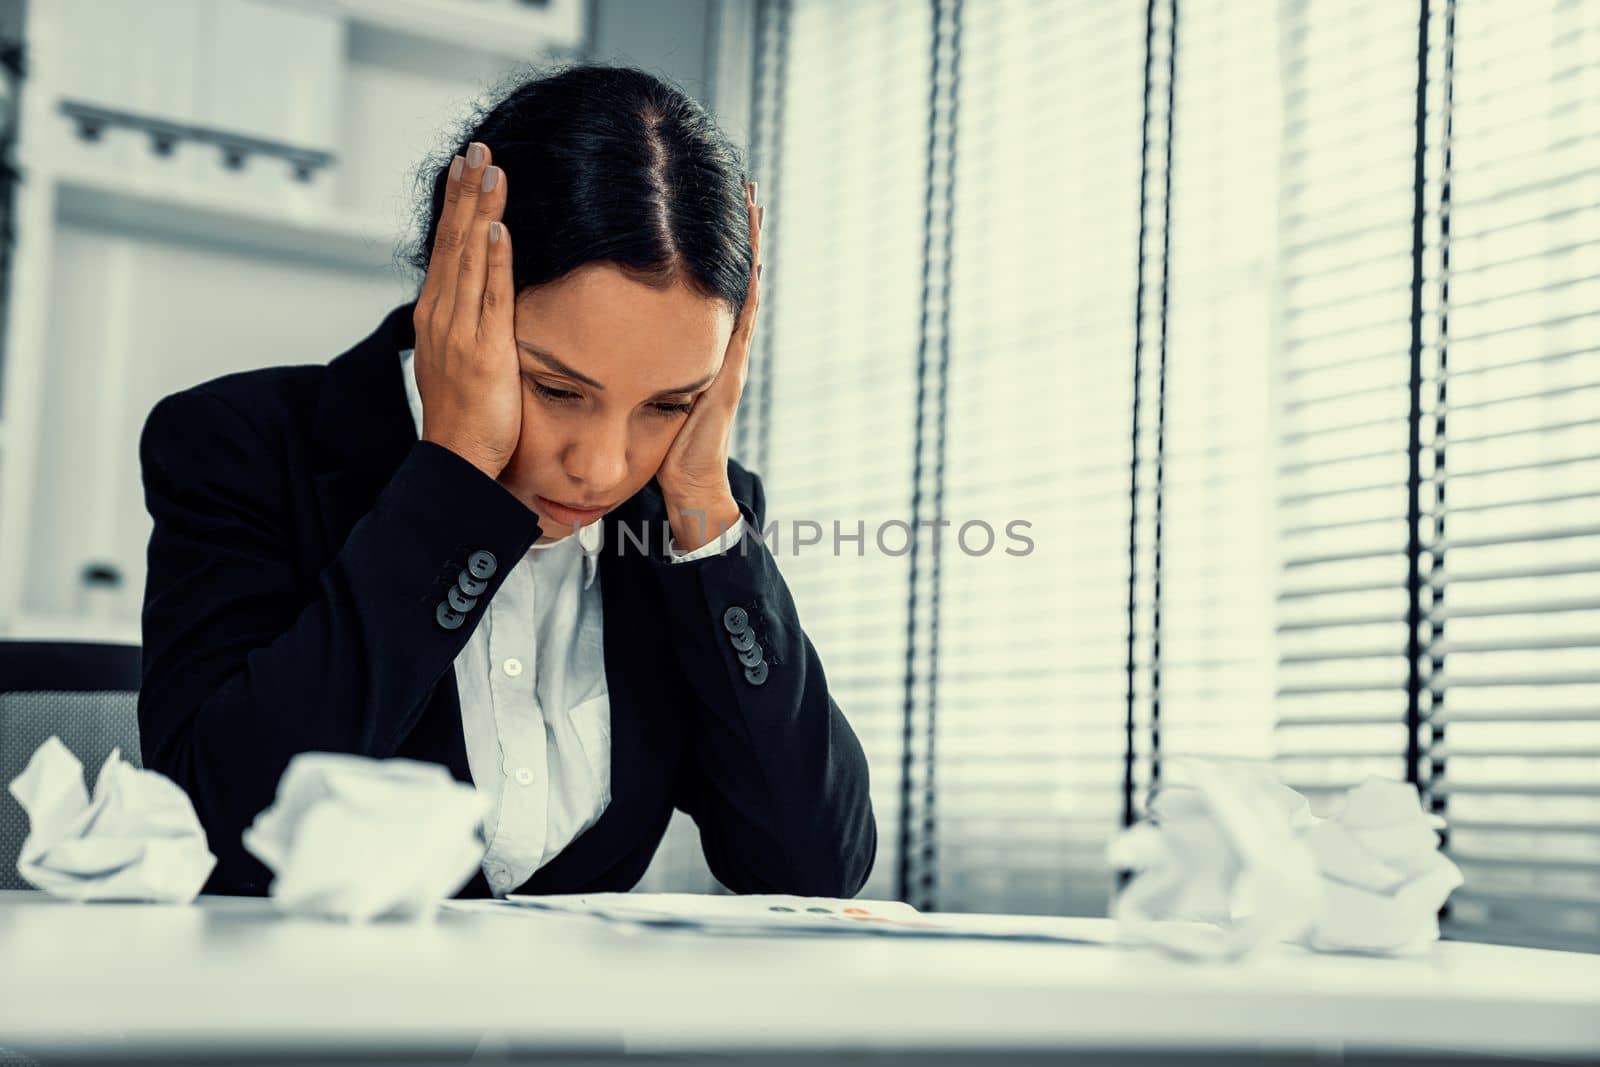 A competent female employee who has become completely exhausted as a result of overburdened work. Concept of unhealthy life as an office worker, office syndrome, effect from overwork.